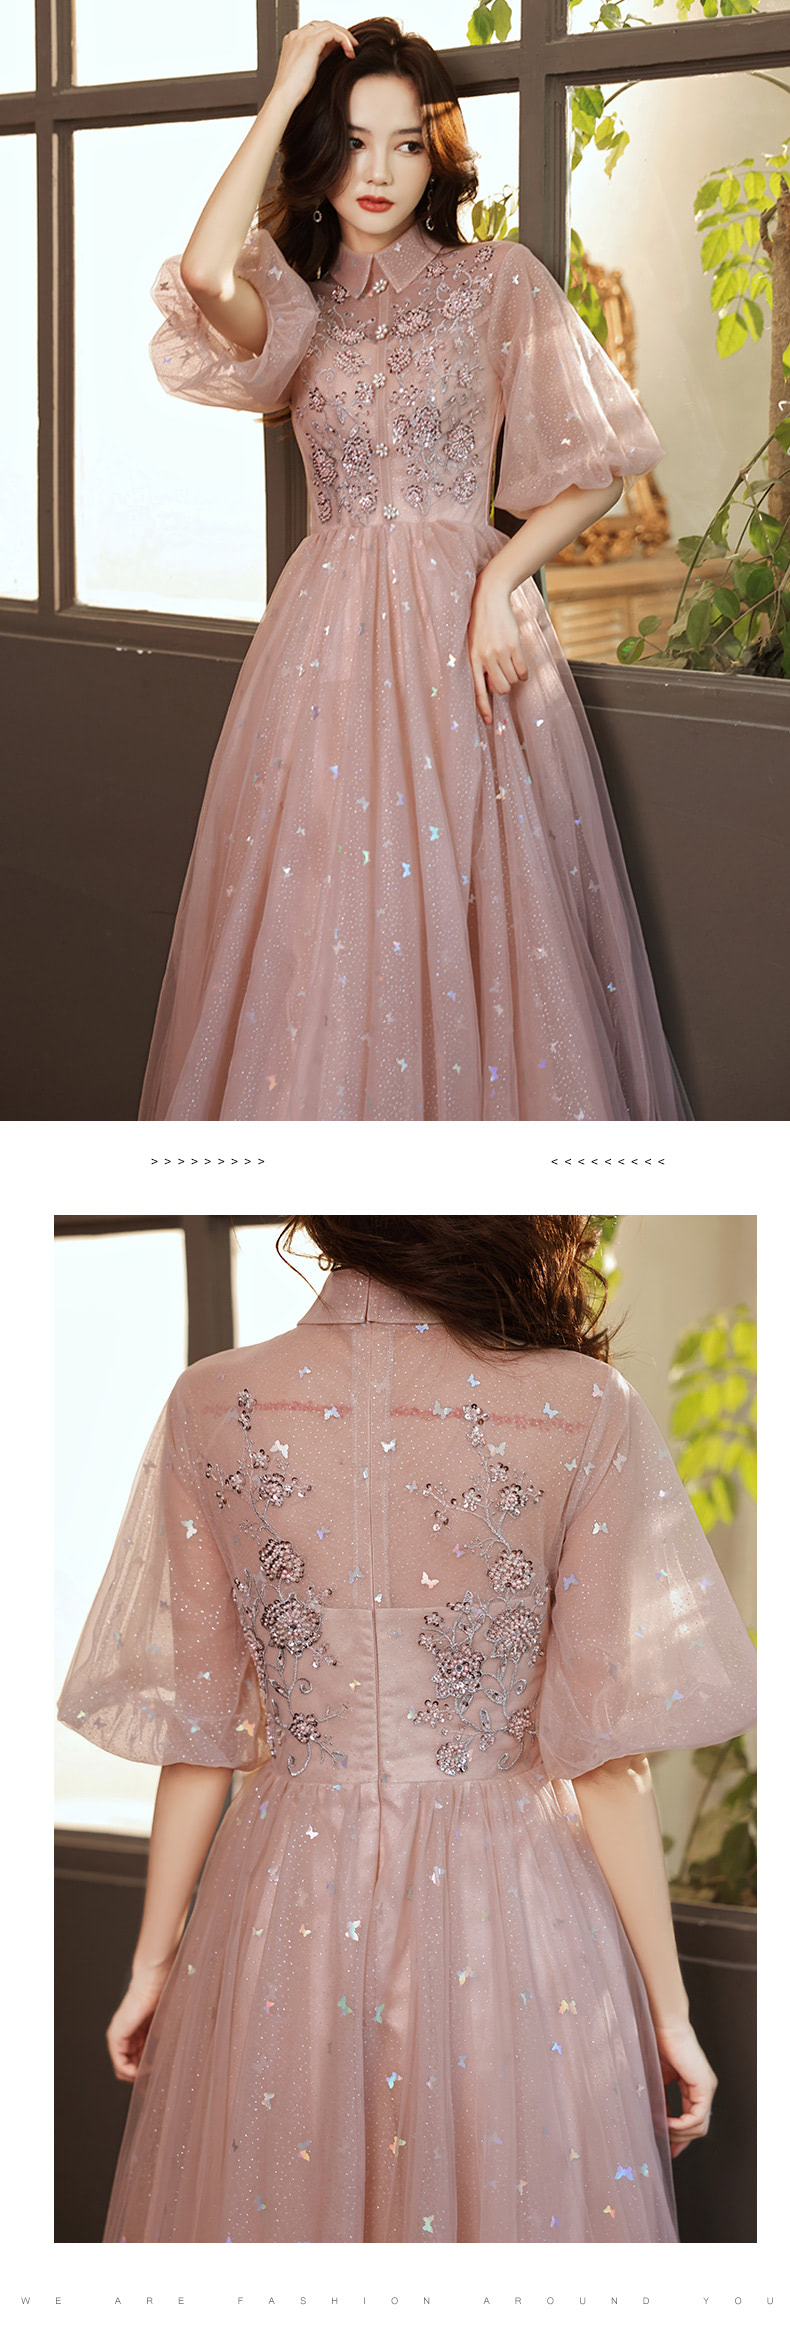 Vintage-Chic-Pink-Prom-Dress-Flora-Embroidery-Formal-Ball-Gown16.jpg